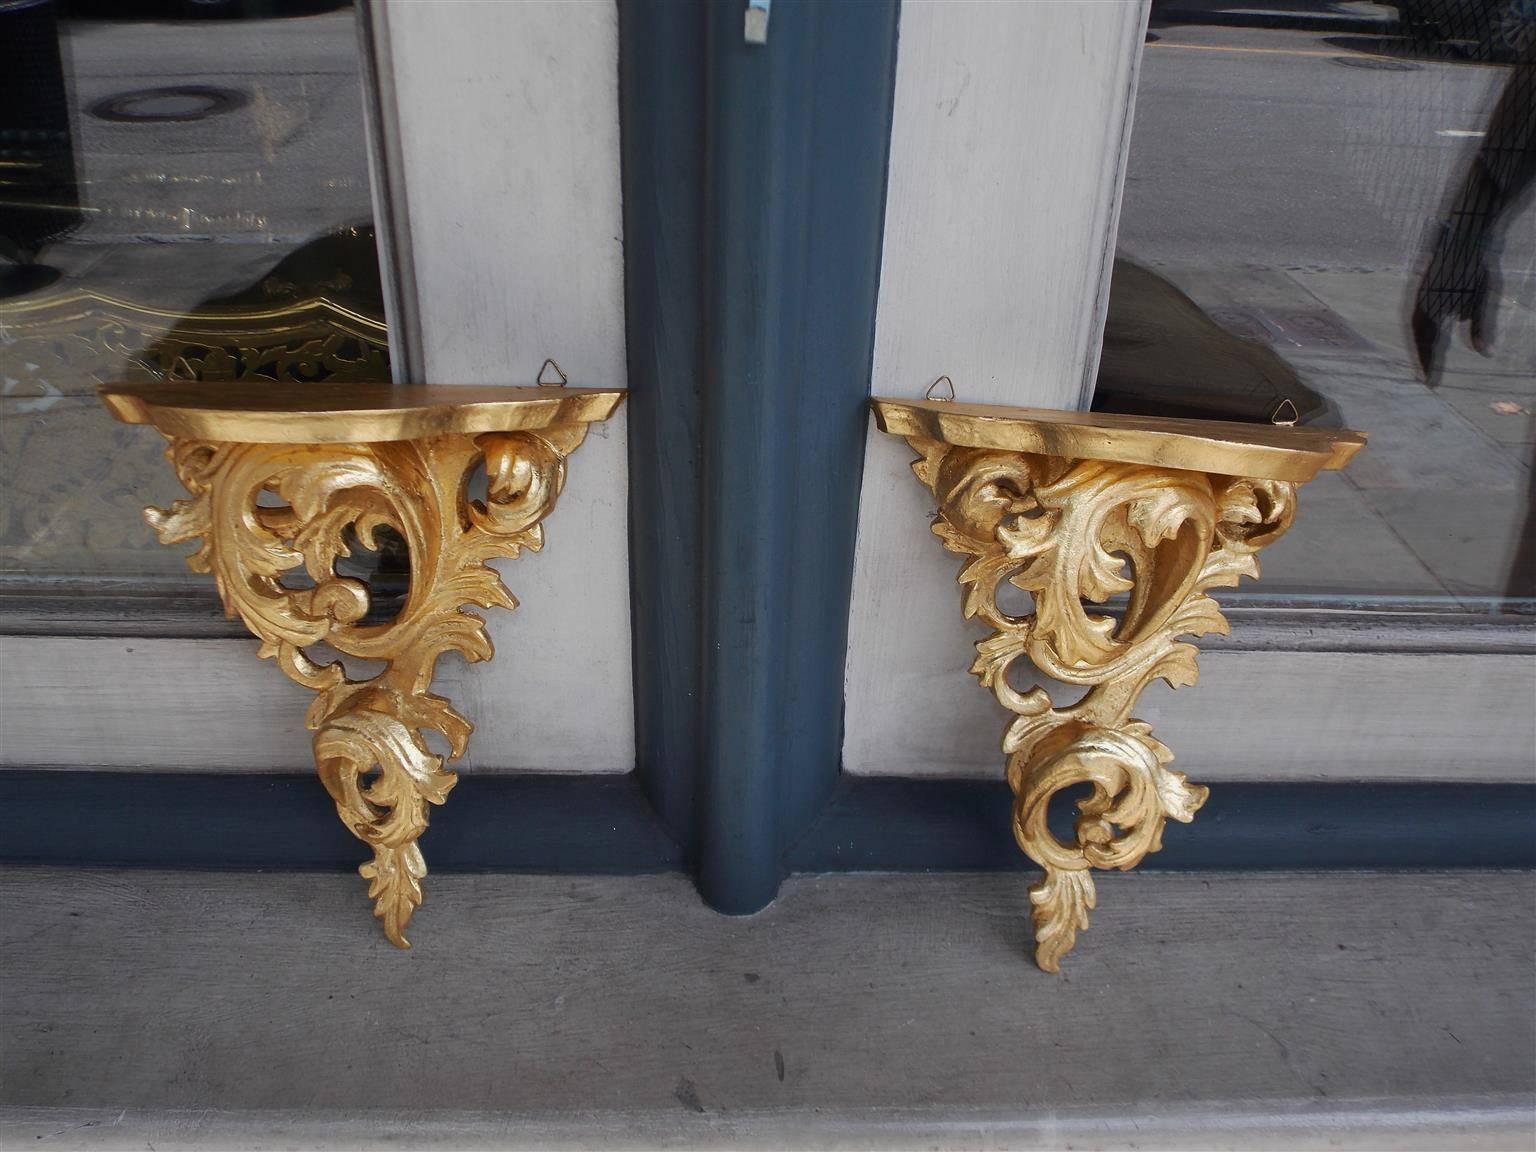 Pair of Italian gilt carved wood wall brackets with molded edge upper shelves and lower scrolled acanthus floral motif, Mid-19th Century.